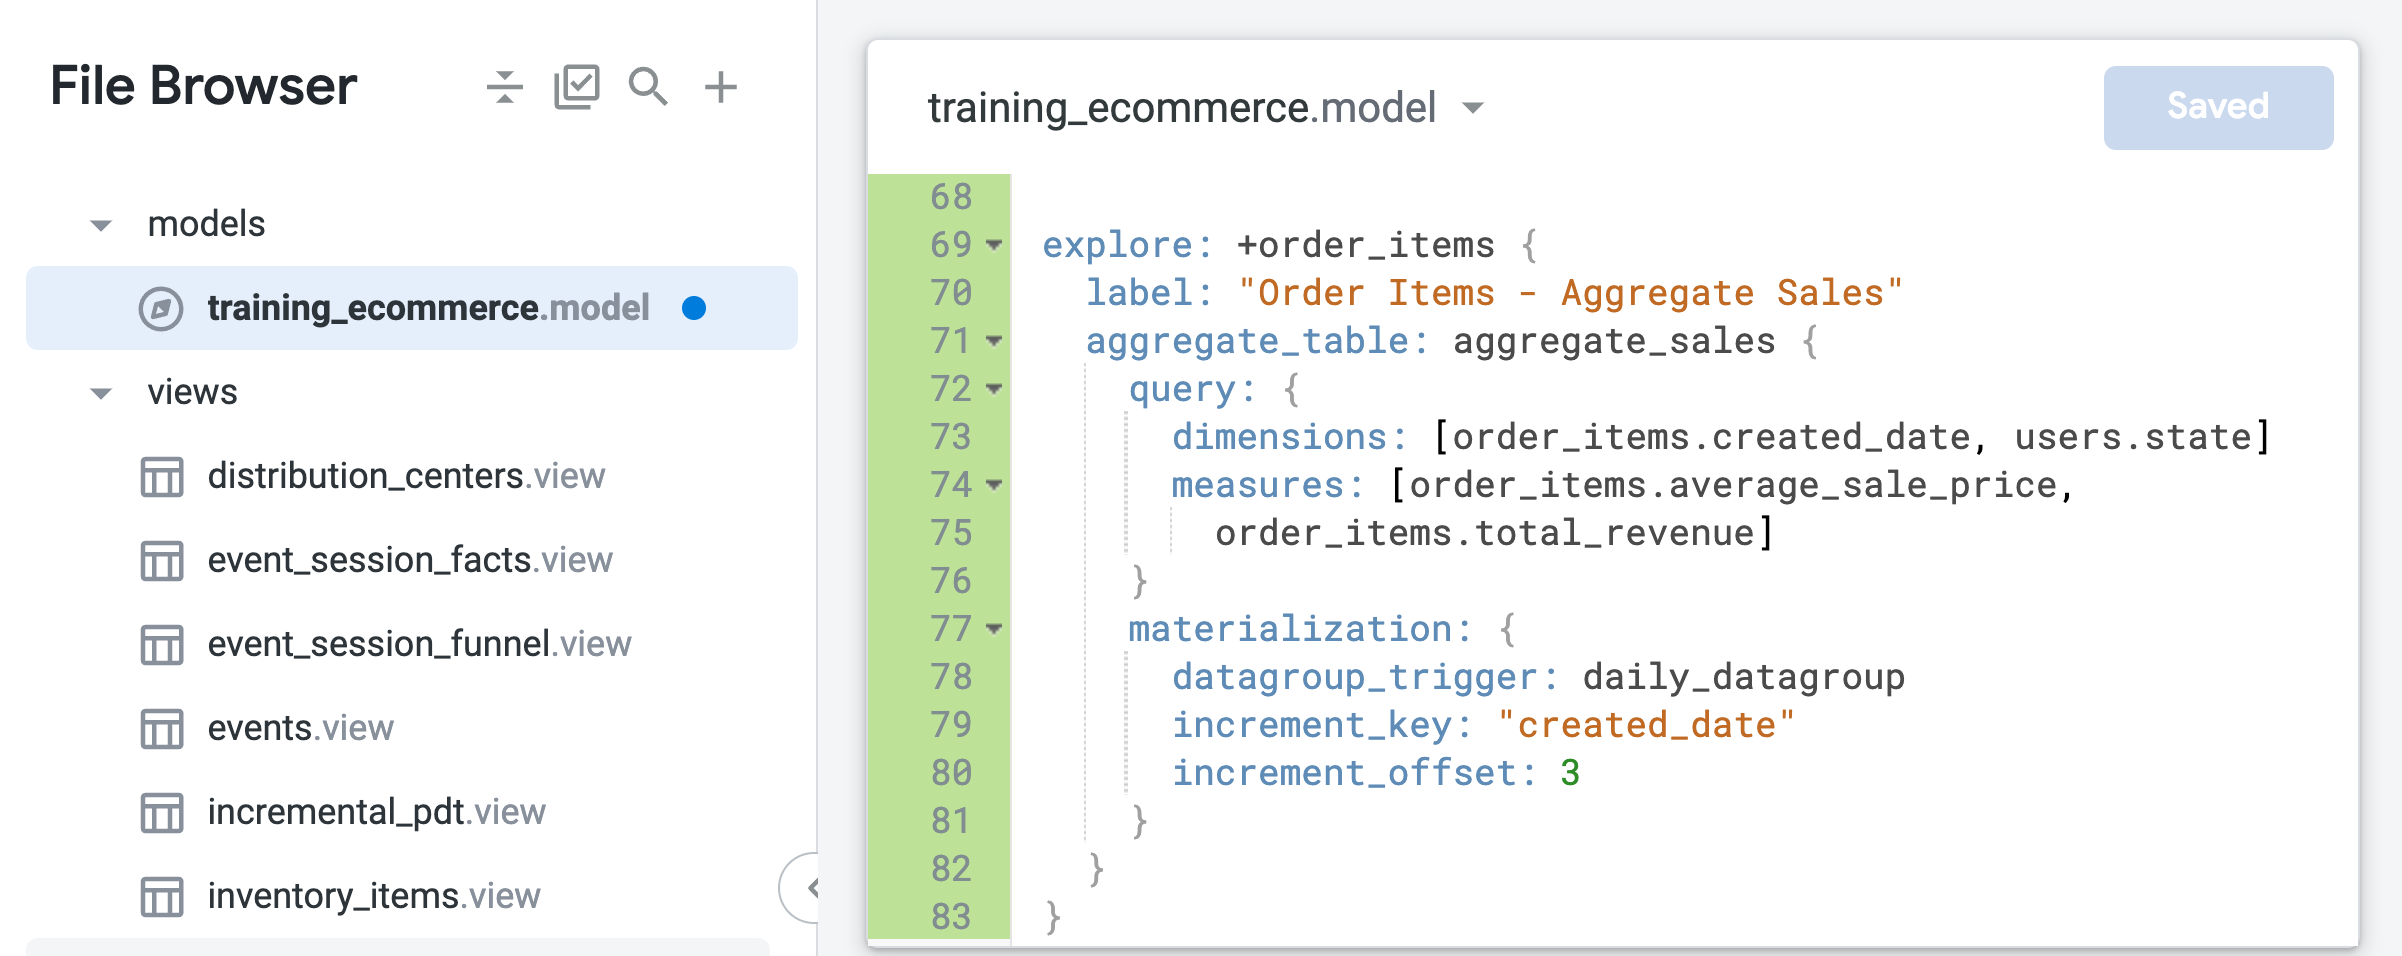 The open training_ecommerce.model file displaying the order items explore refinement lookml code